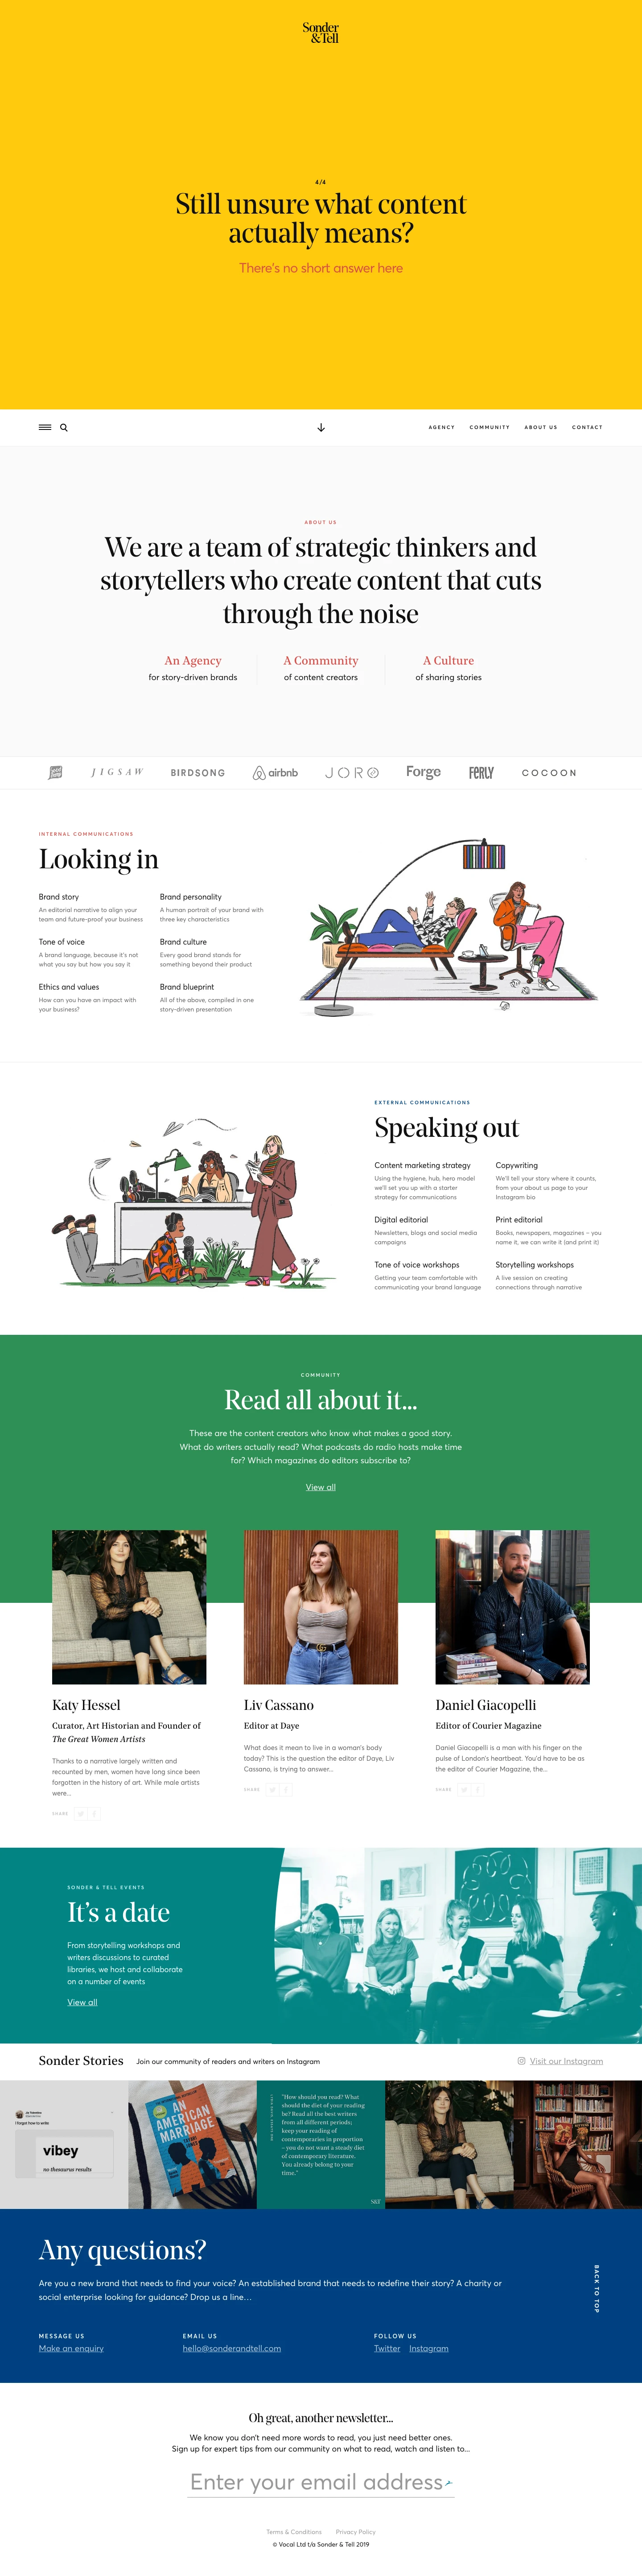 Sonder & Tell Landing Page Example: We are a team of strategic thinkers and storytellers who create content that cuts through the noise.